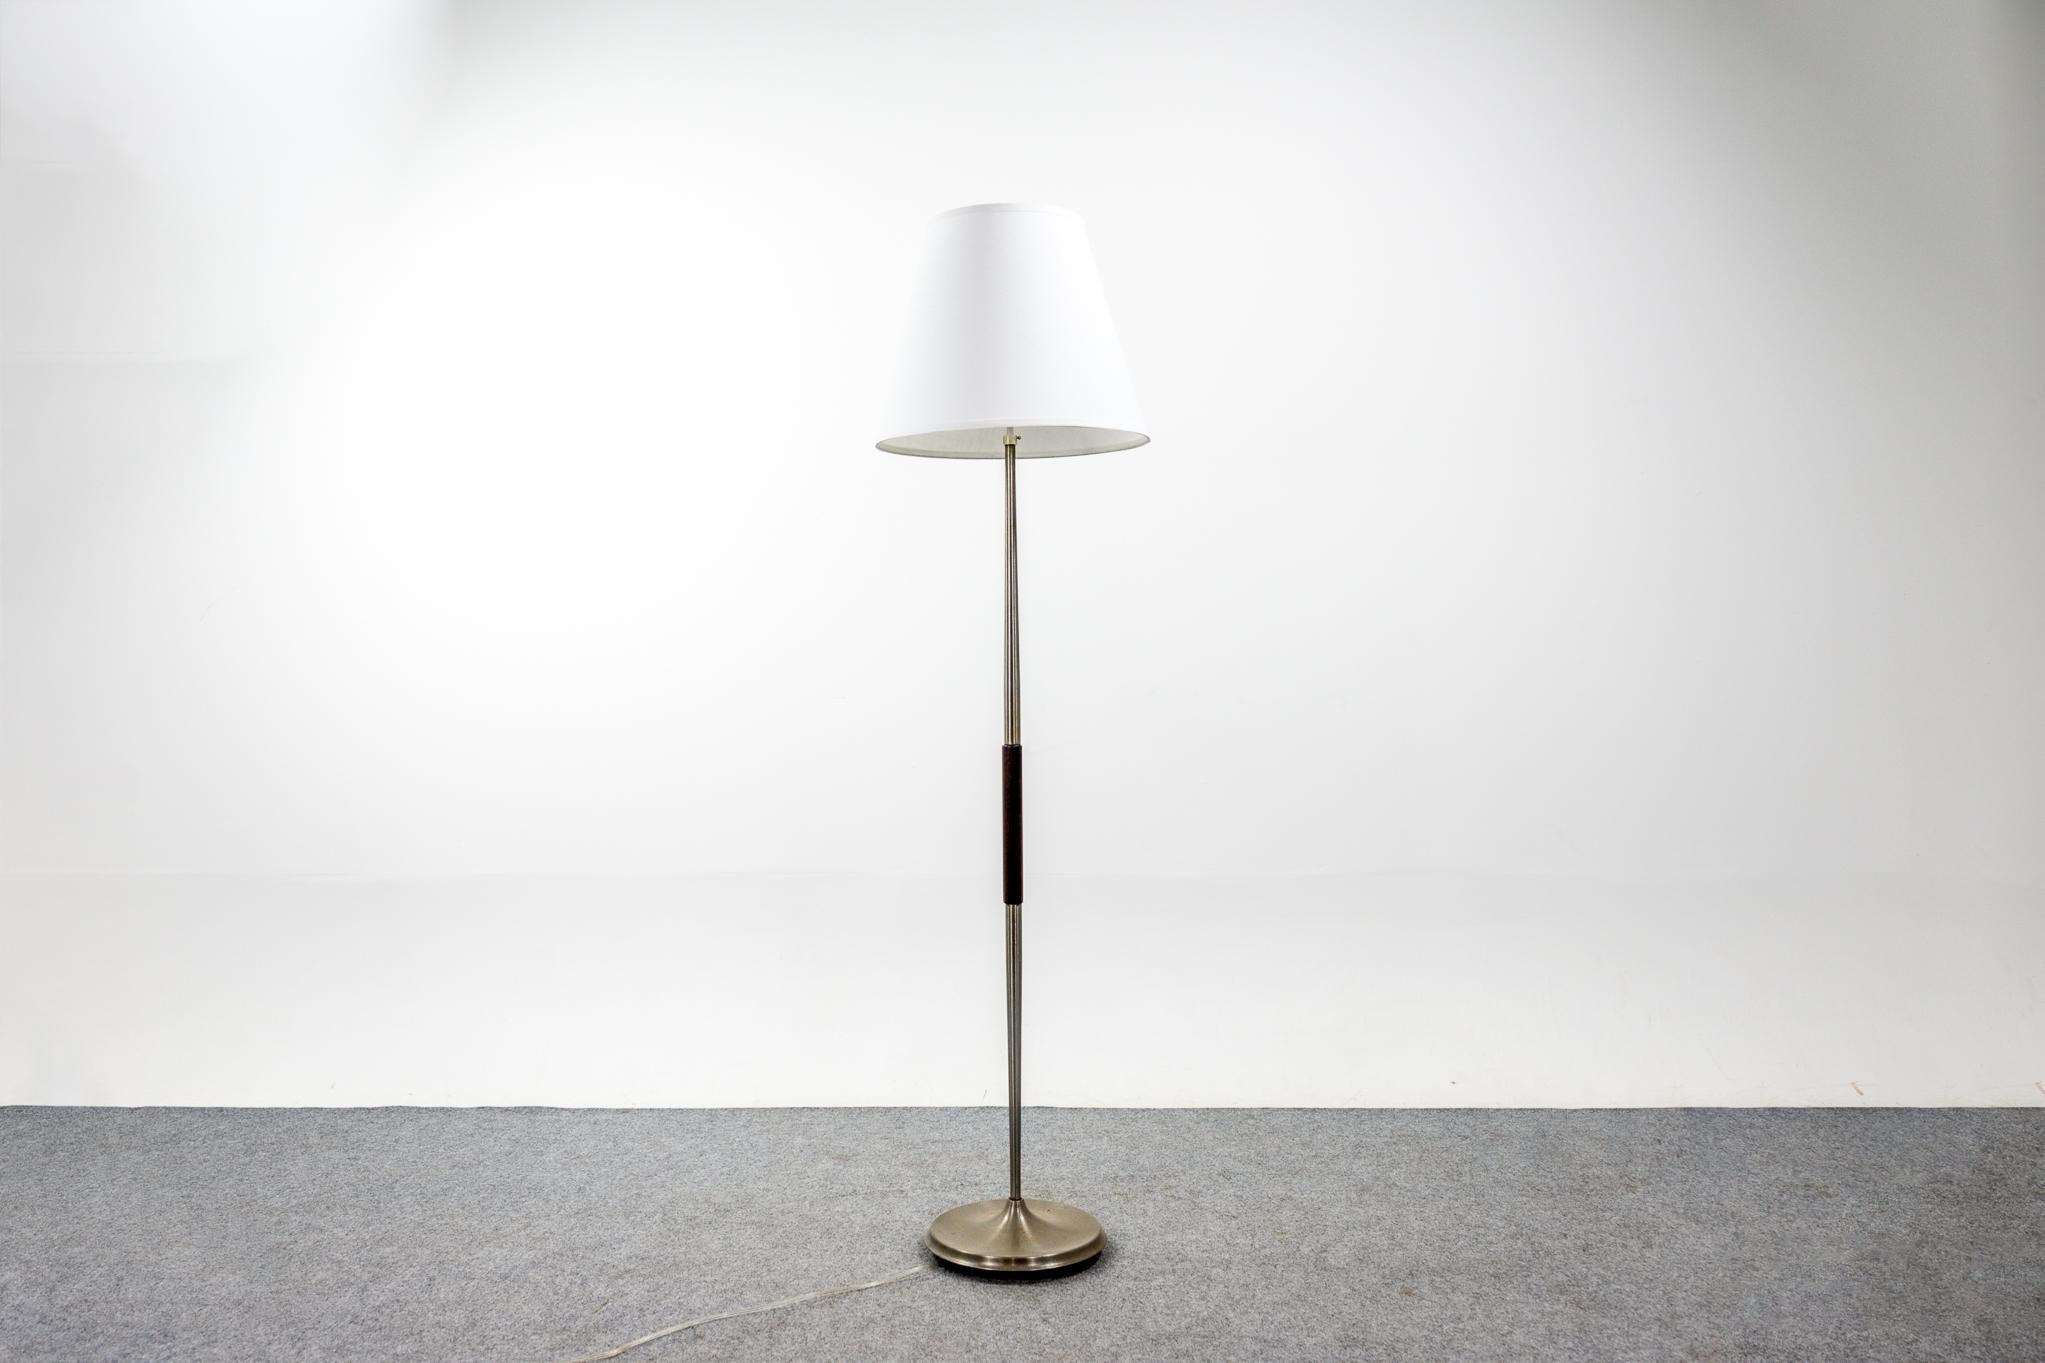 Rosewood and metal Danish floor lamp, circa 1960's. Custom quality shade, in keeping with the vintage aesthetic. Tri-light bulb and fixture give the user the option to adjust the brightness of the lamp to suit different lighting requirements.